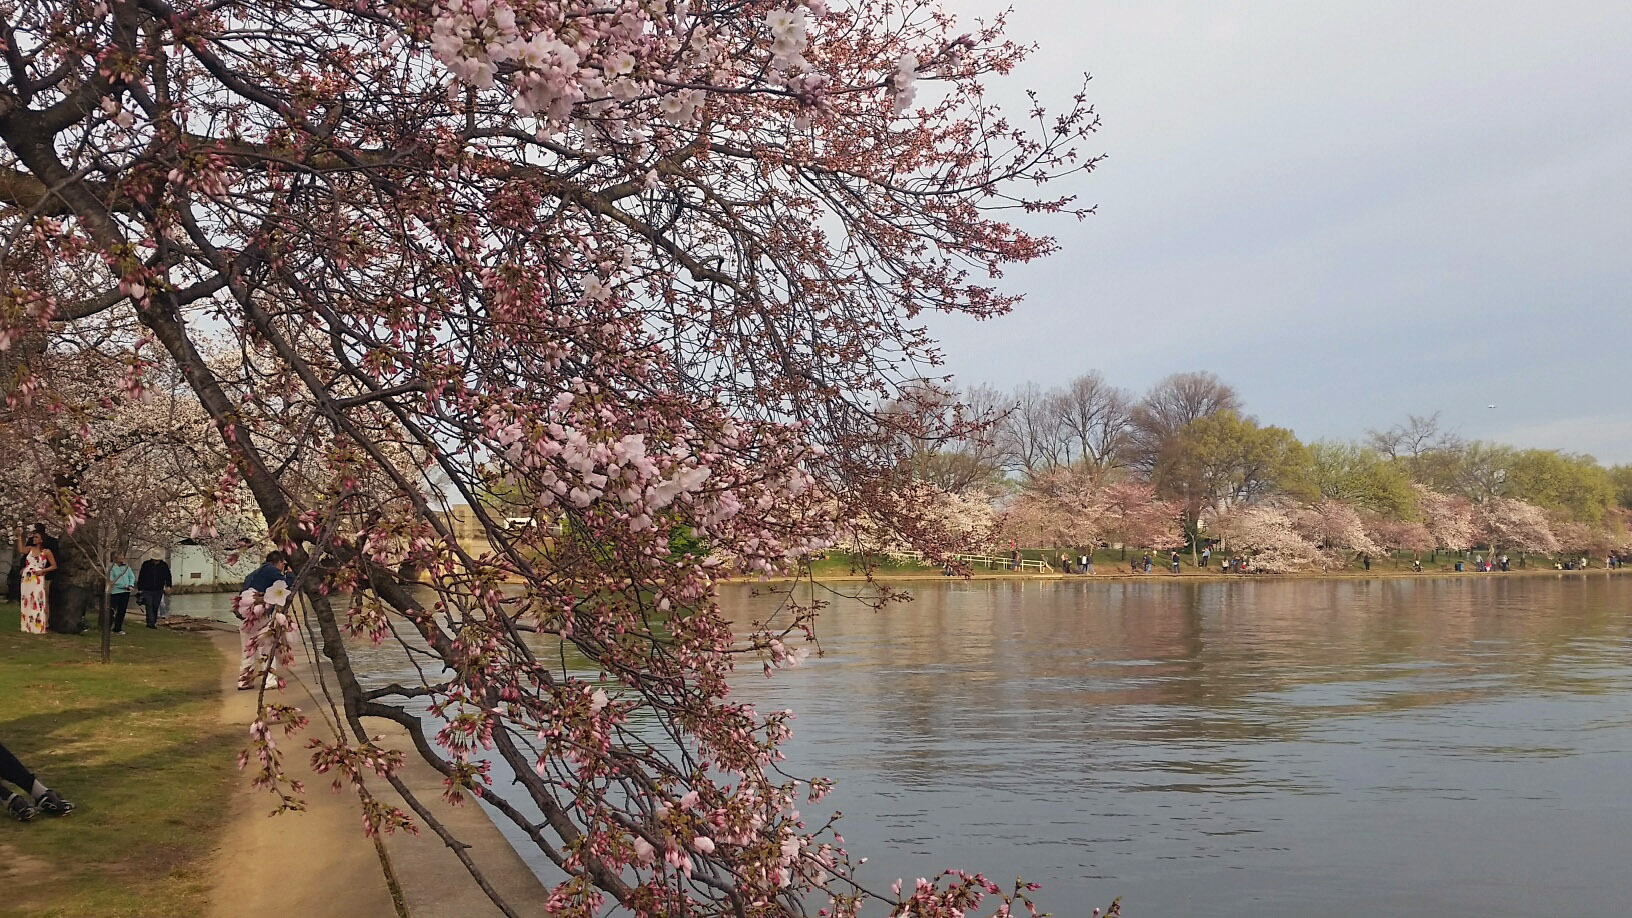 Pink cherry blossoms are budding along the Tidal Basin in D.C. on Wednesday, March 23, 2016. Peak bloom, when 70 percent of the blossoms are blooming, is expected to arrive by the weekend. (WTOP/Kathy Stewart)